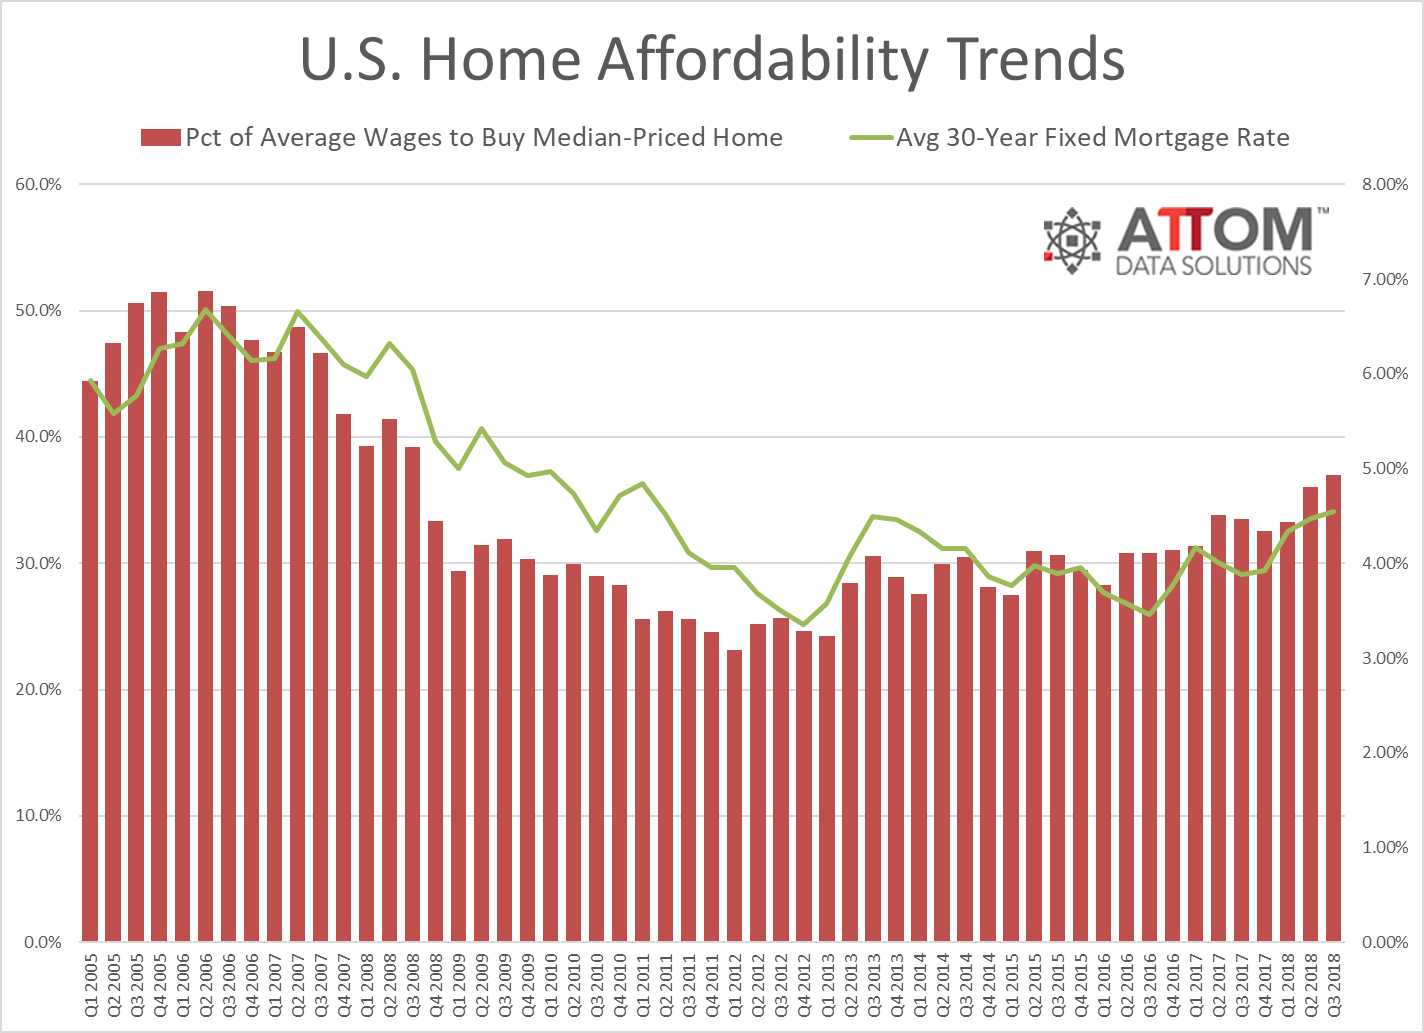 Home prices in the third quarter fell to their lowest affordability rate since the third quarter of 2008, according to new statistics from ATTOM Data Solutions